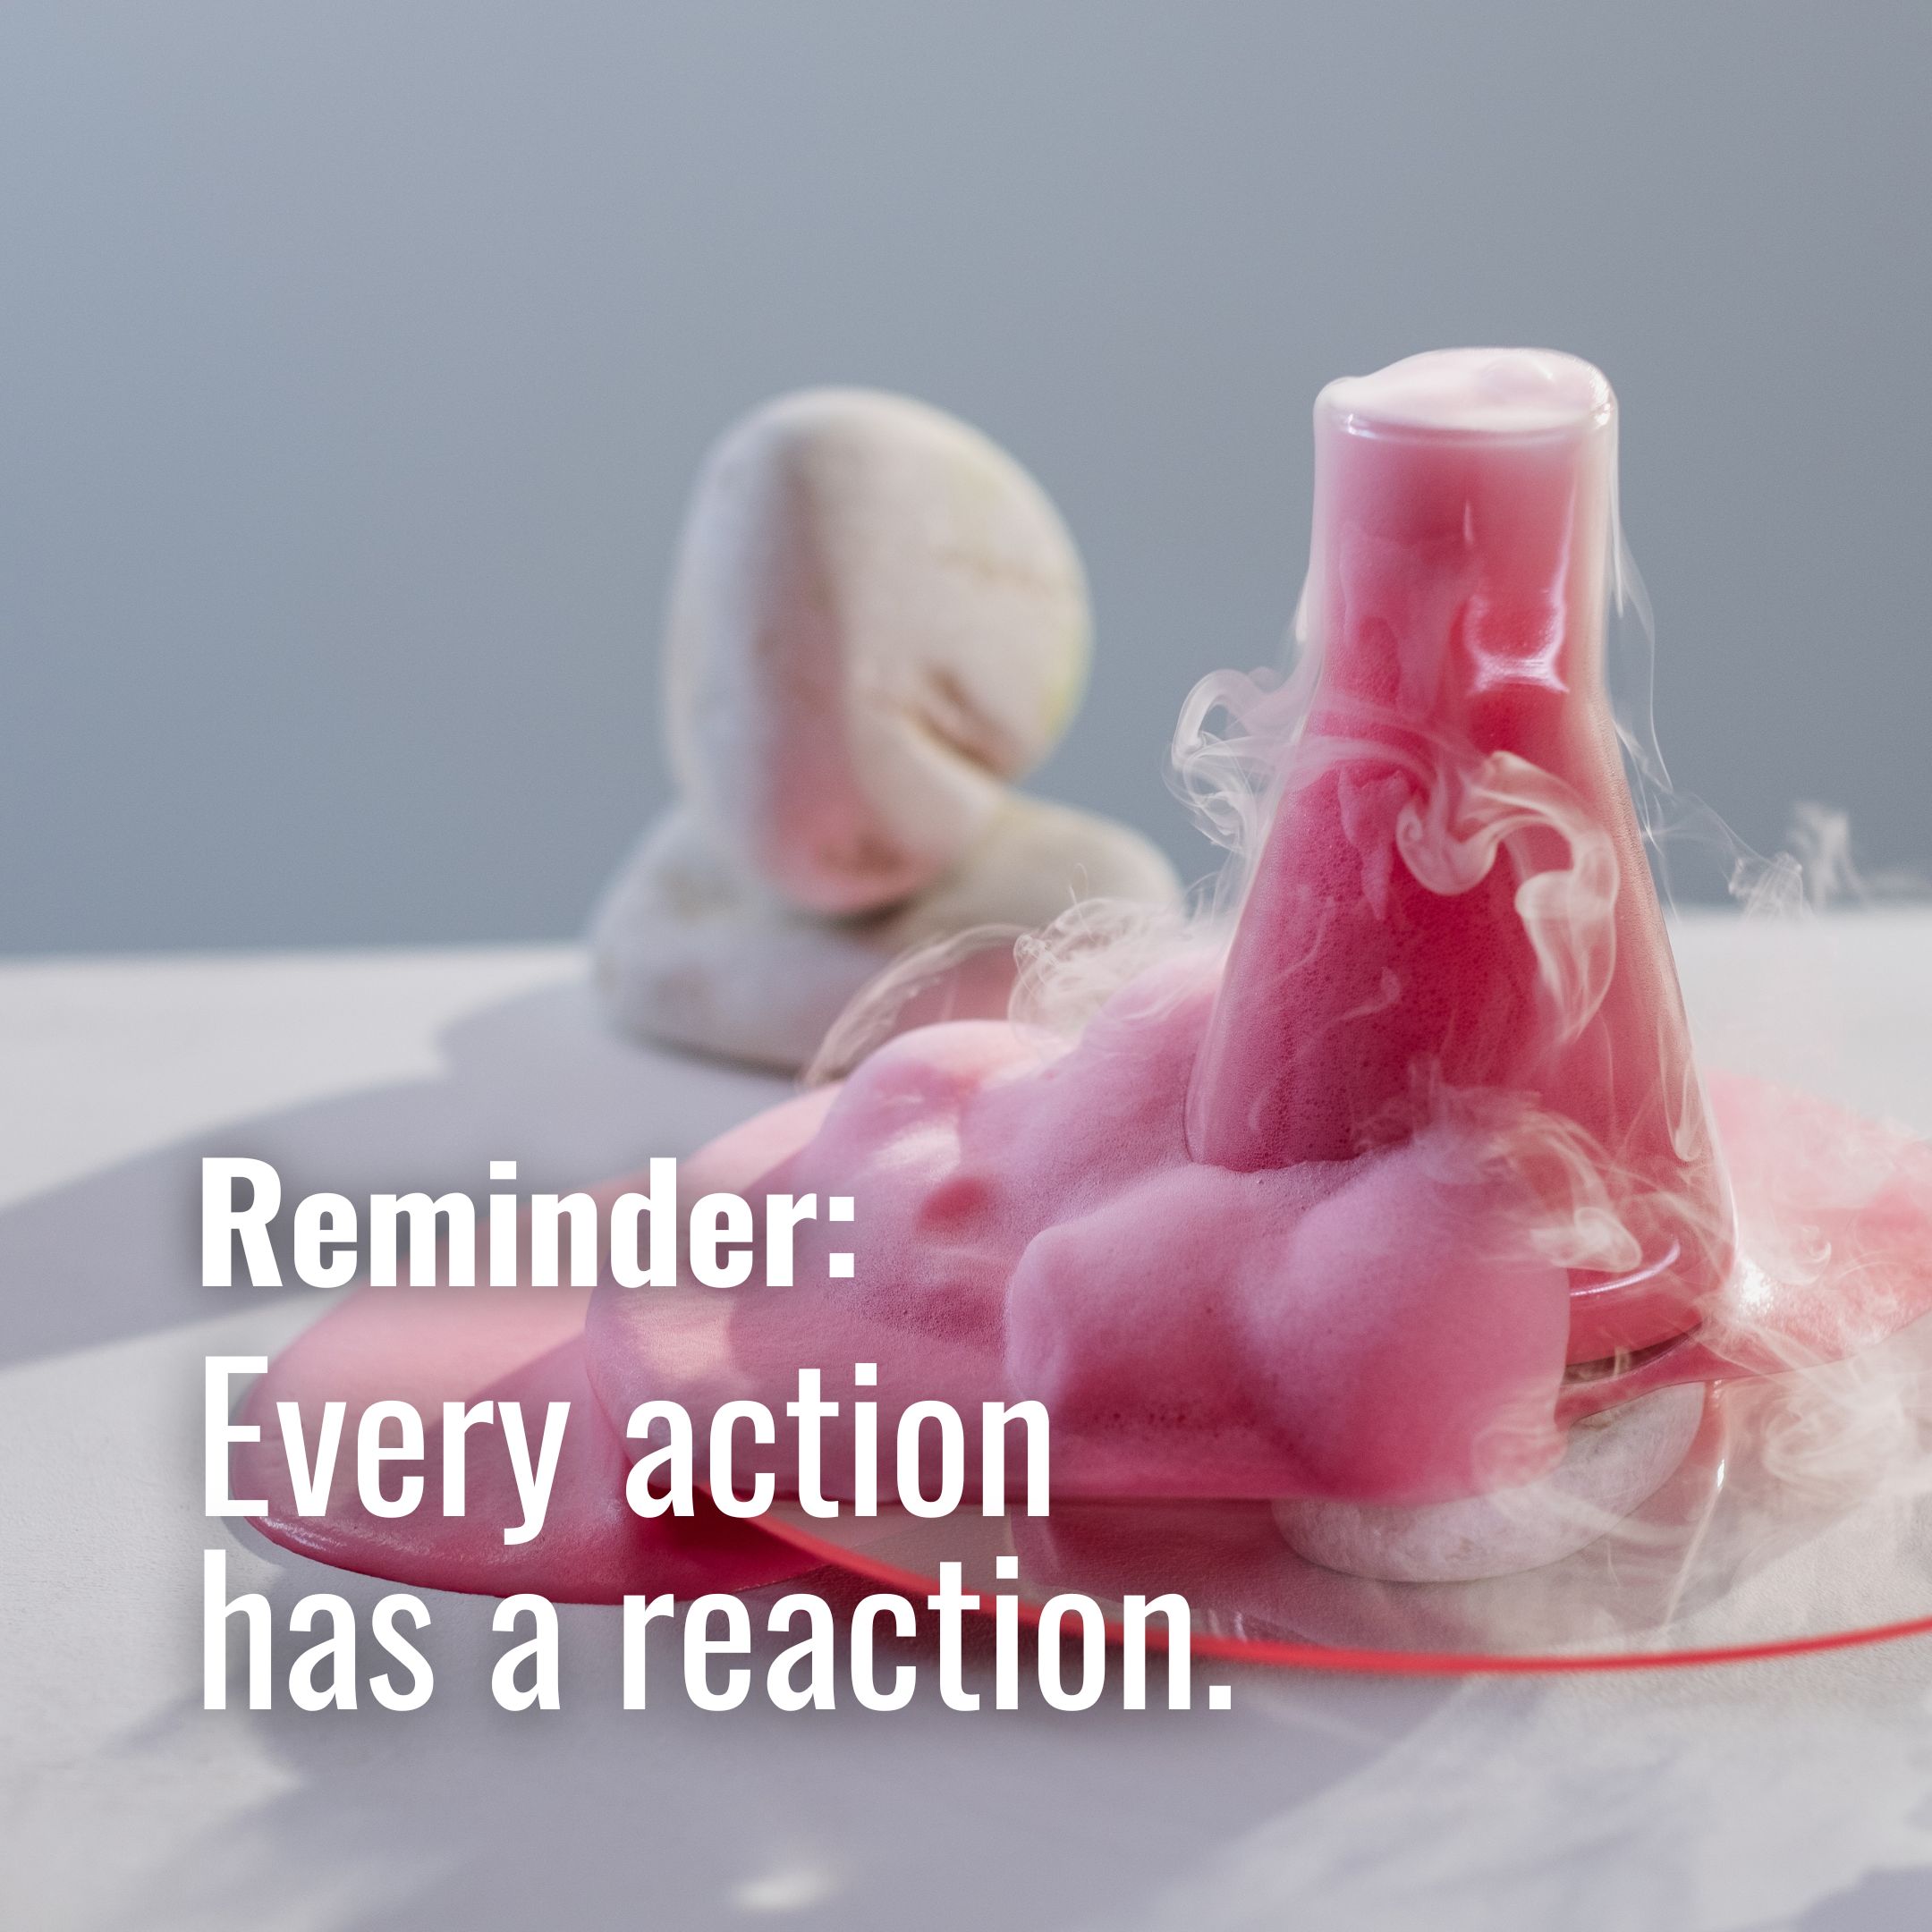 Every Action Has a Reaction.